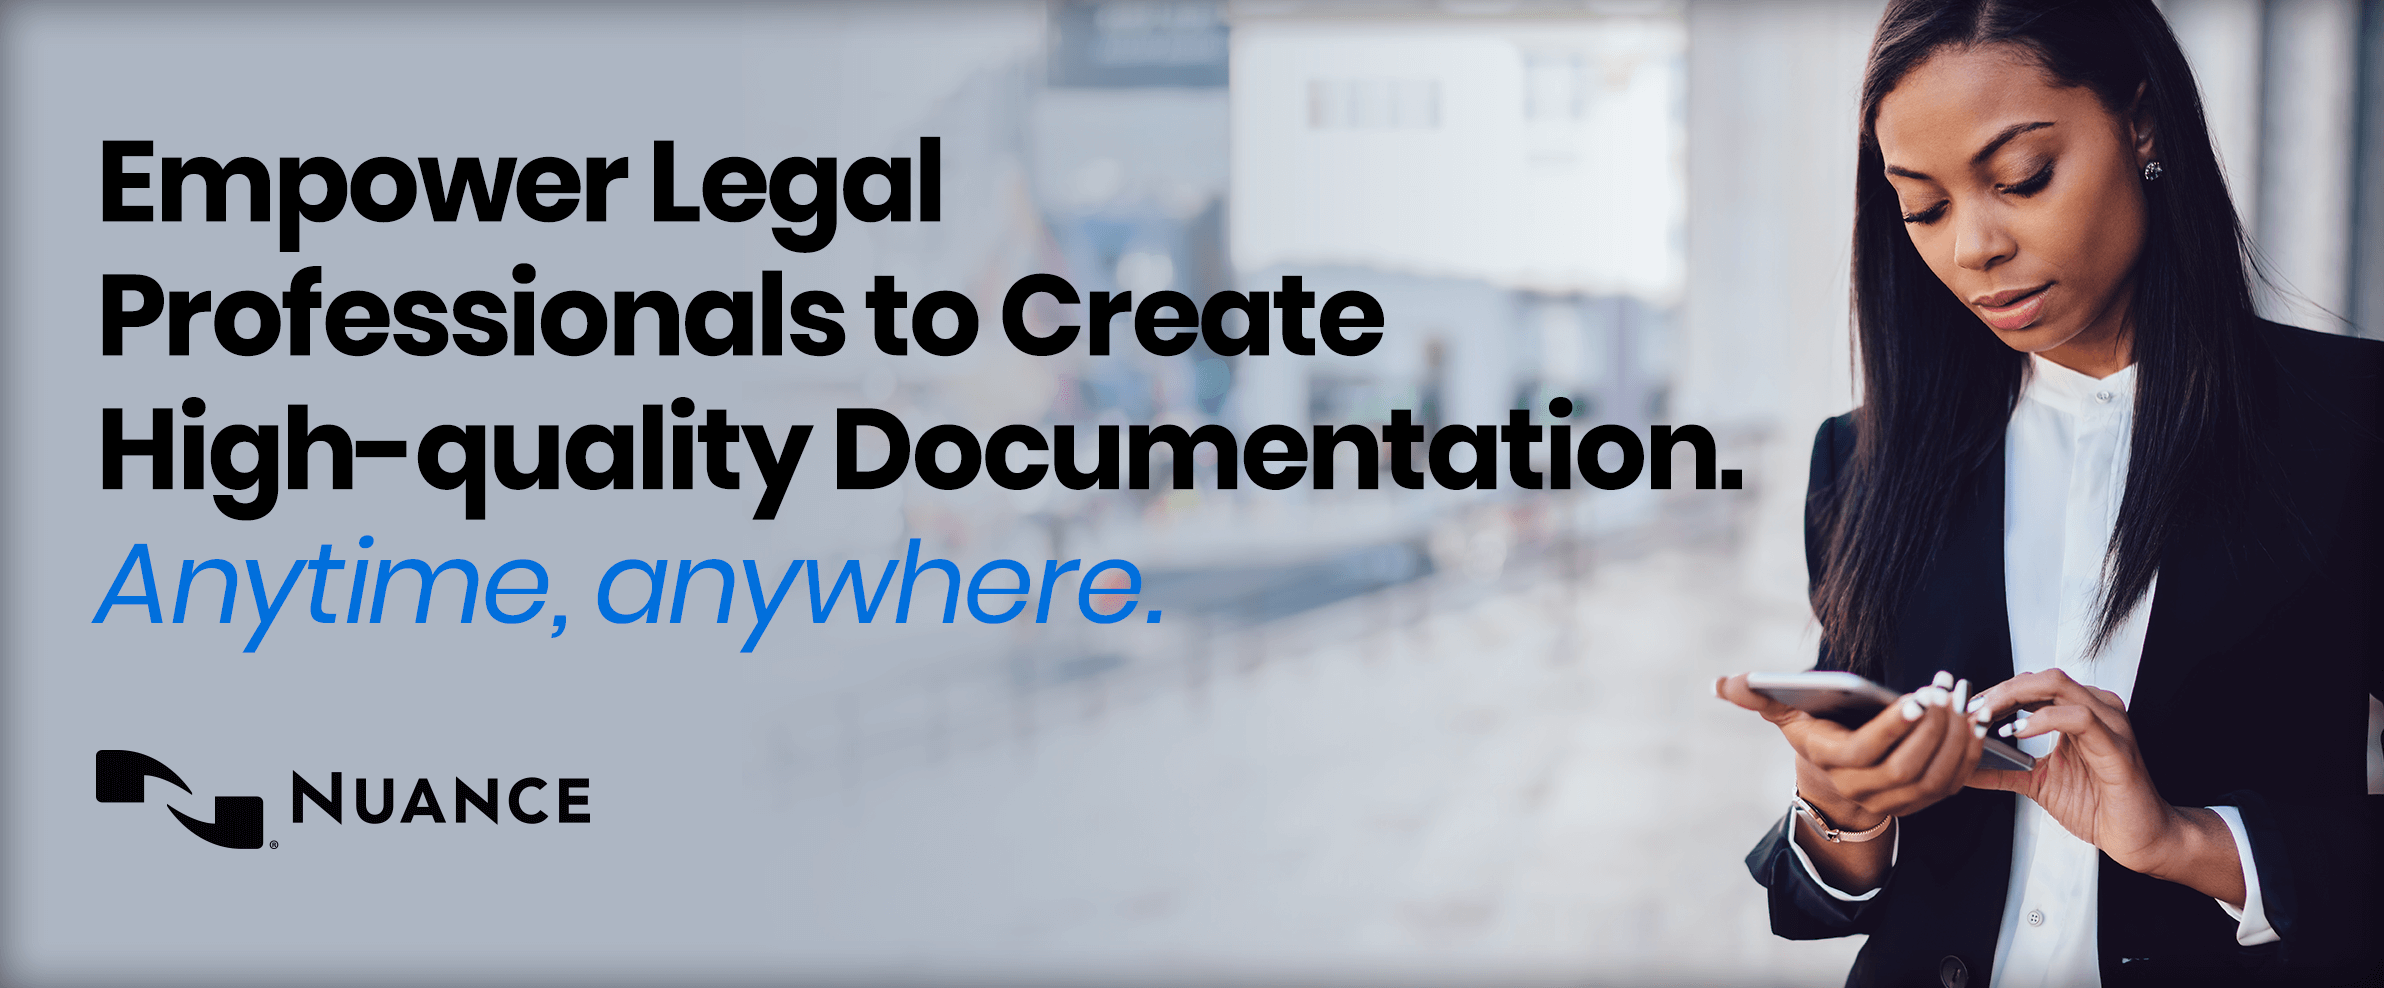 Empower Legal Professionals to Create High-quality Documentation. Anytime, anywhere.